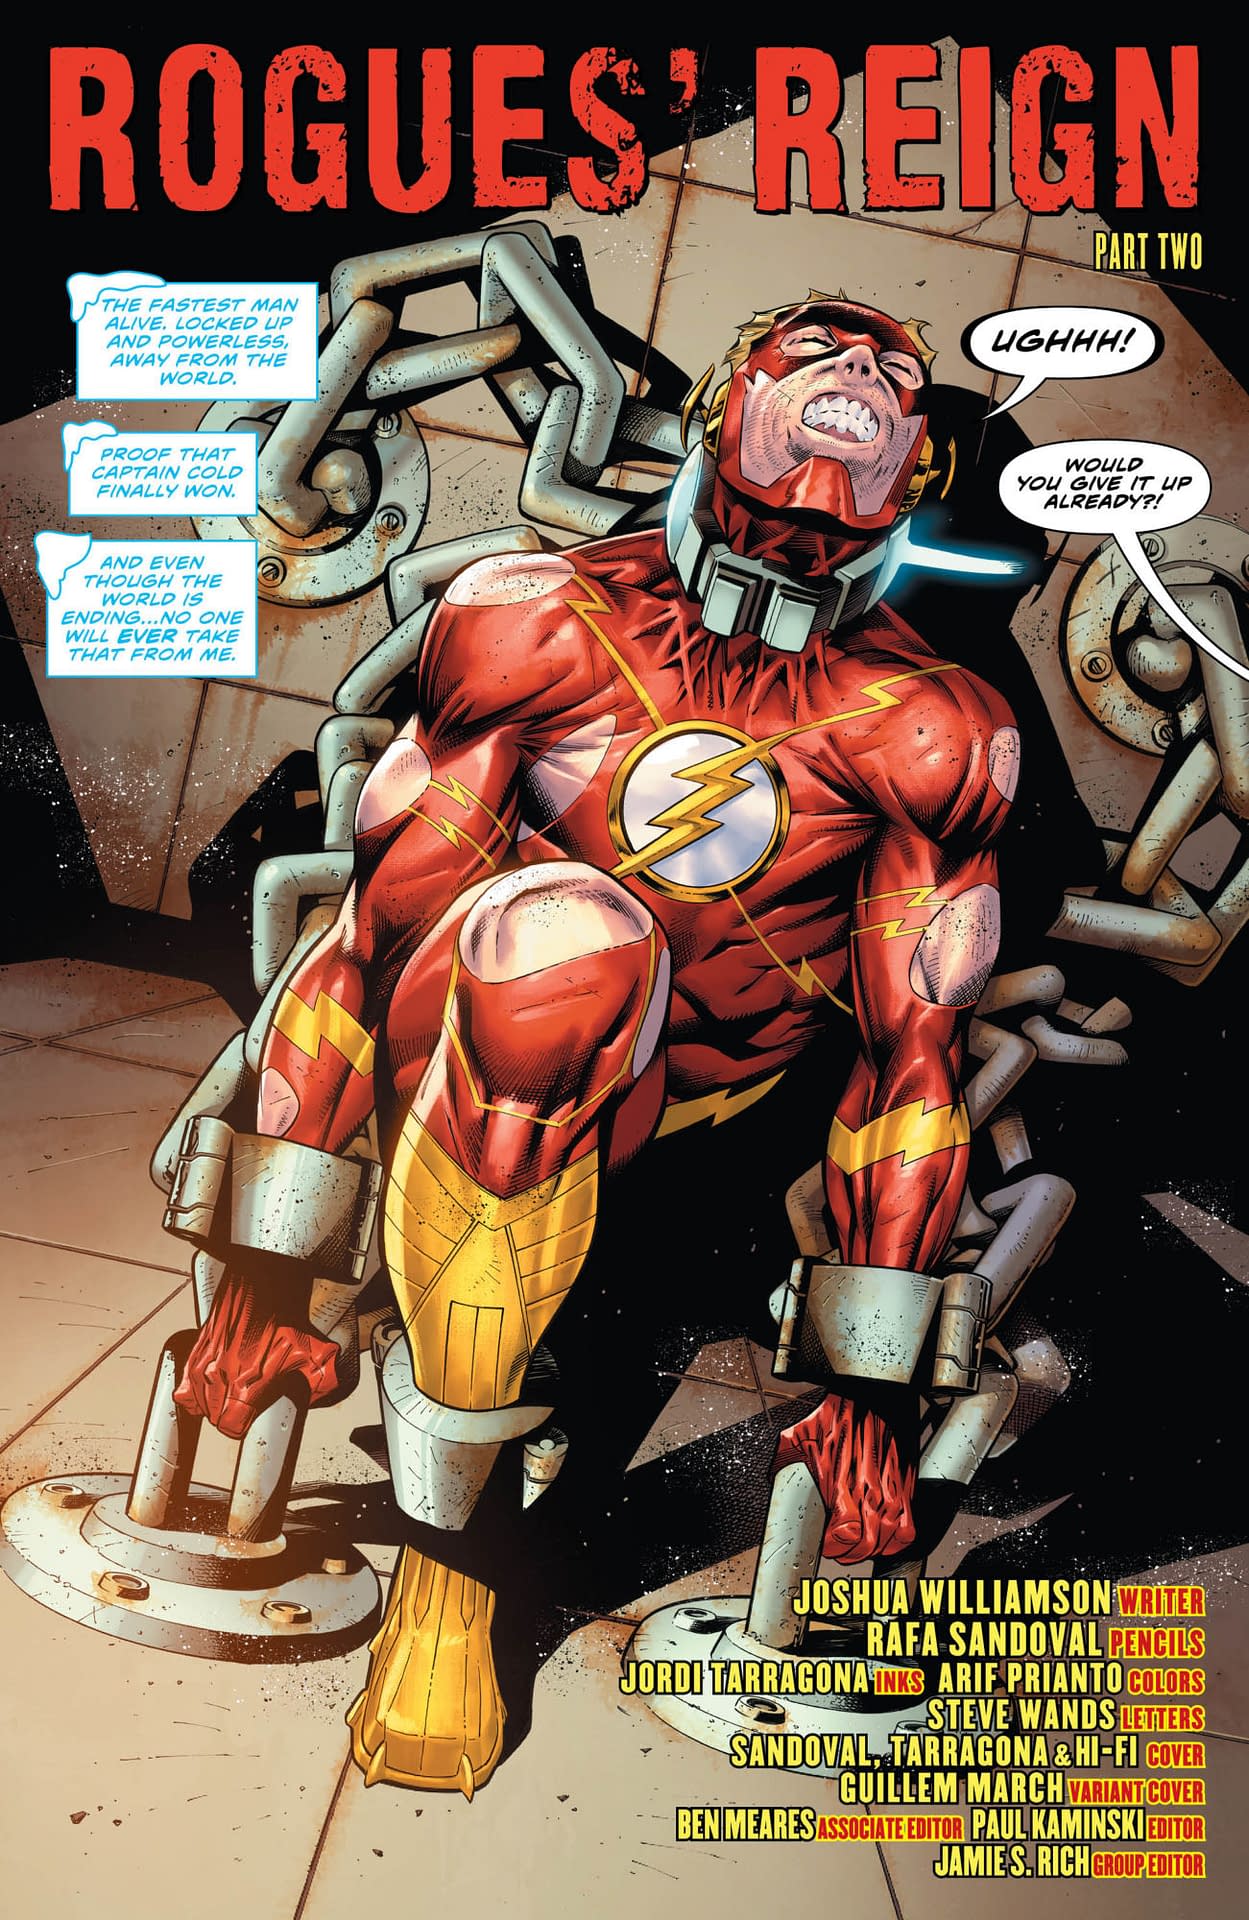 Who Helps Barry Break Out of Prison in The Flash #83 [Preview]